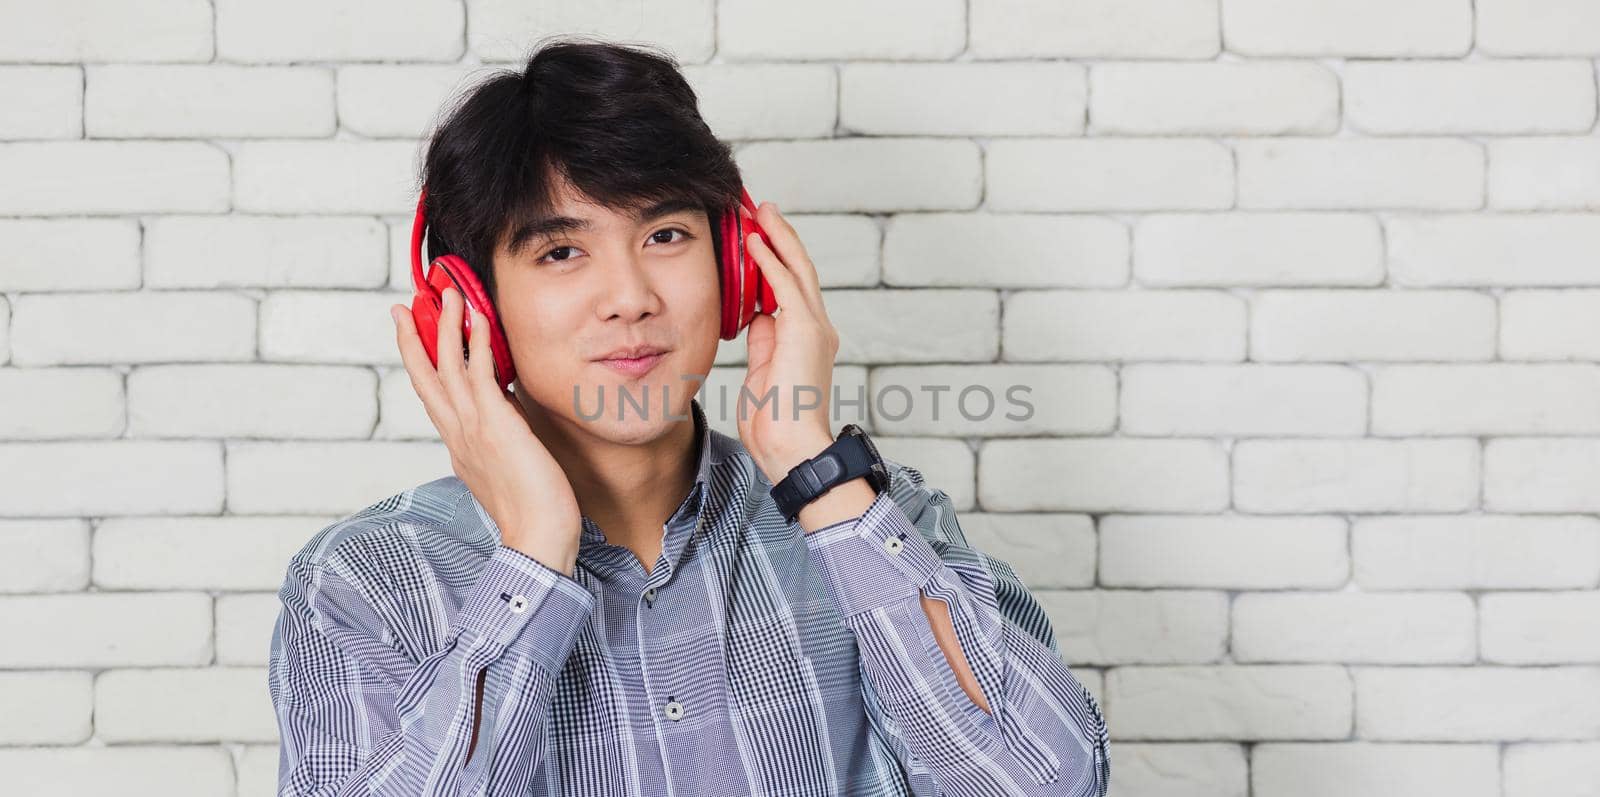 Portrait of Asian handsome young man he smile listening to music in headphones on brick wall background. Happy teenage guy smiling. Happy laughing man standing with red headphones